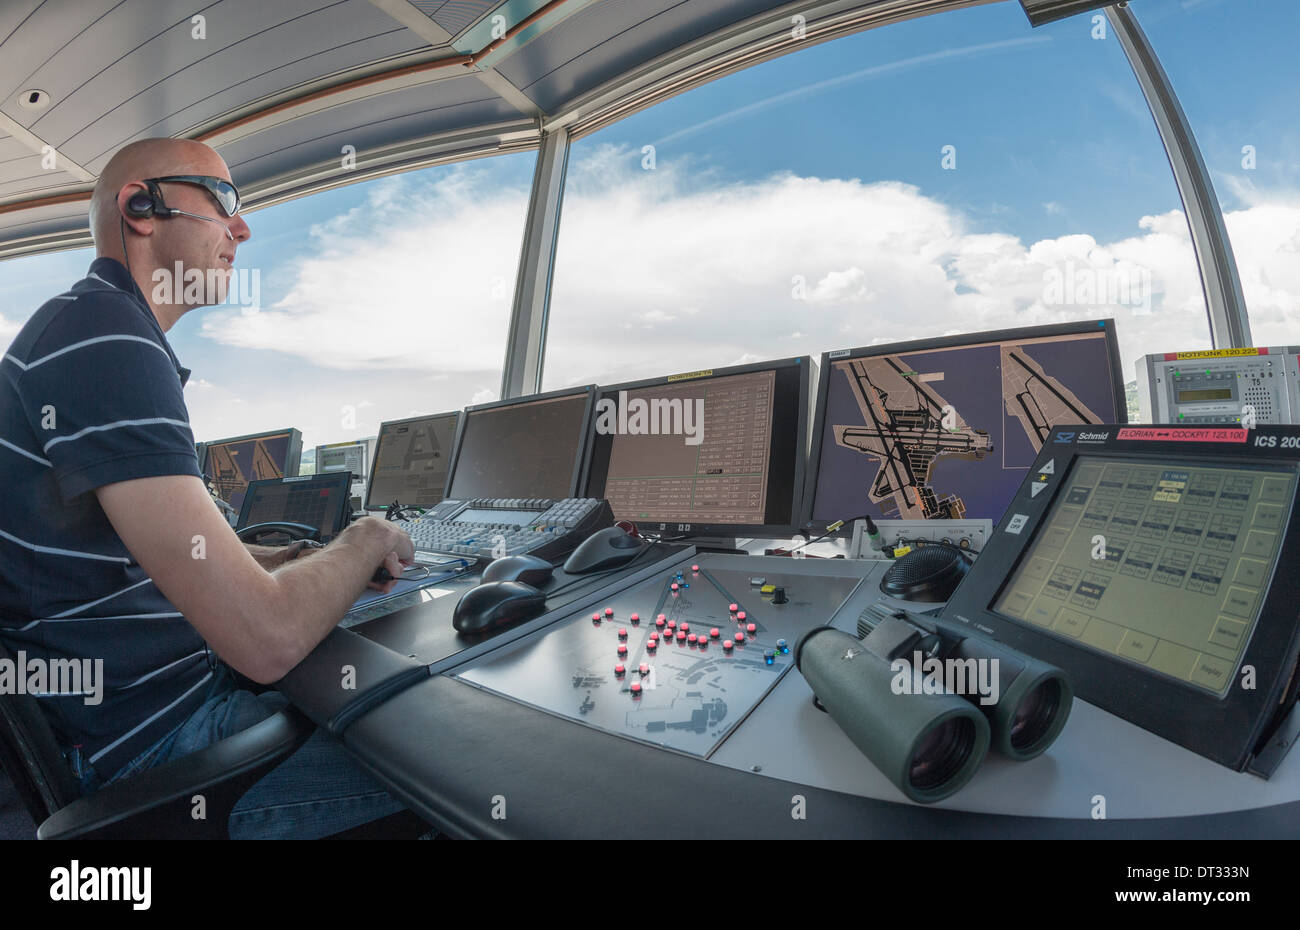 An air traffic controller in the control tower of Zurich/Kloten international airport is monitoring the airport's airfield. Stock Photo